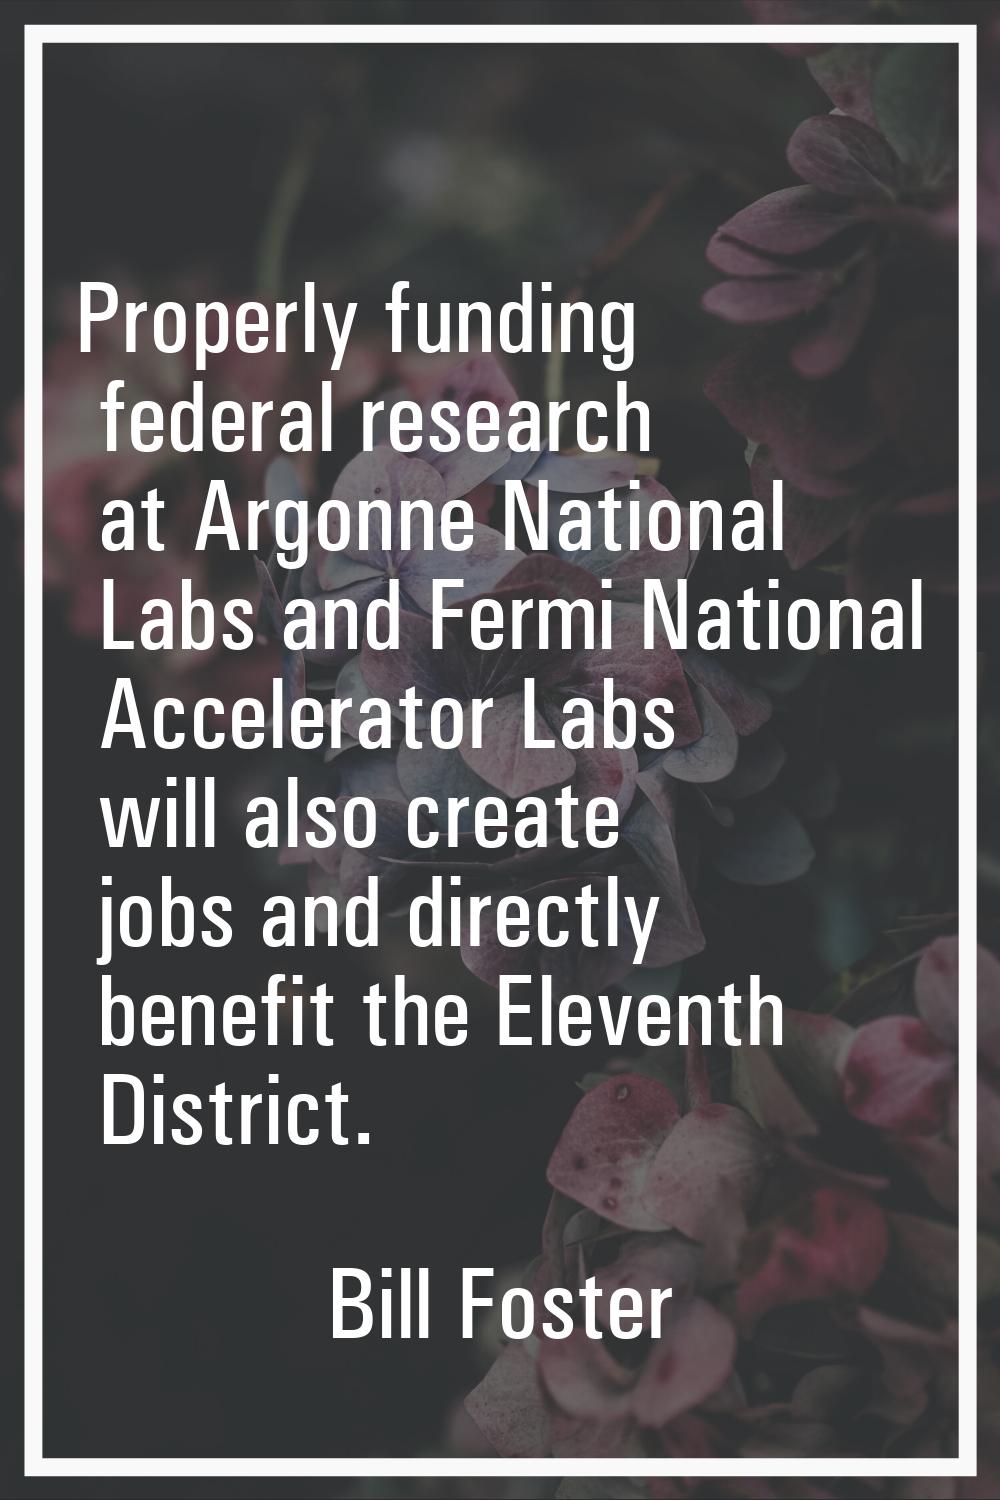 Properly funding federal research at Argonne National Labs and Fermi National Accelerator Labs will